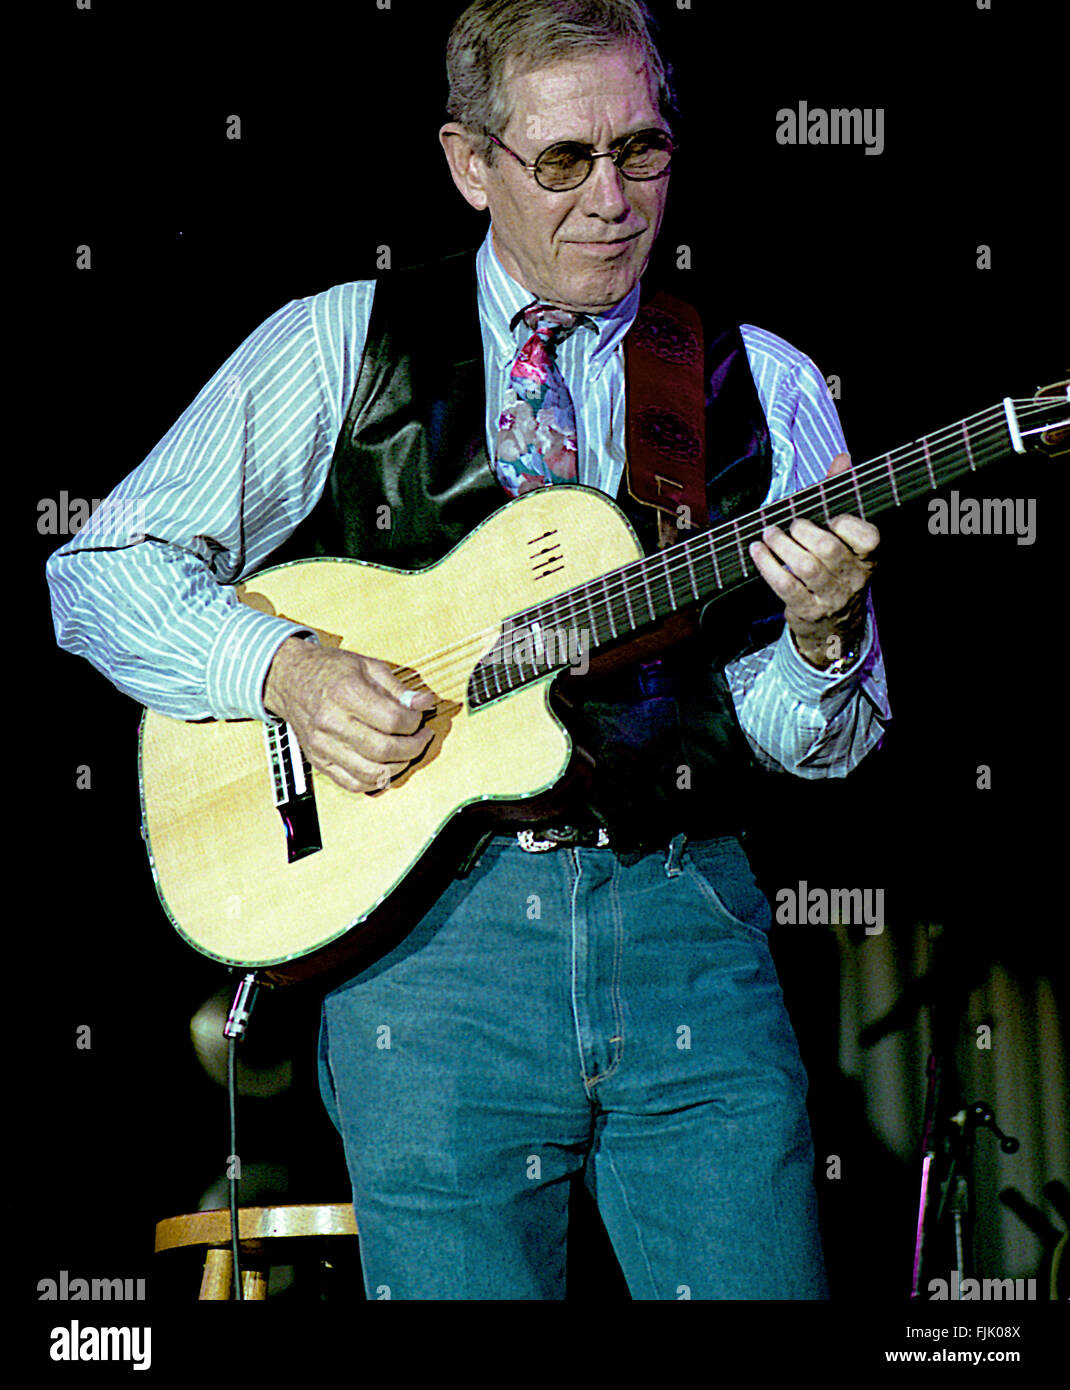 Washington, DC., USA, 21st March, 1992 Guitarist Chet Atkins with the Flecktones live during the 50th anniversary show from the studios' of Voice of America. Credit: Mark Reinstein Stock Photo